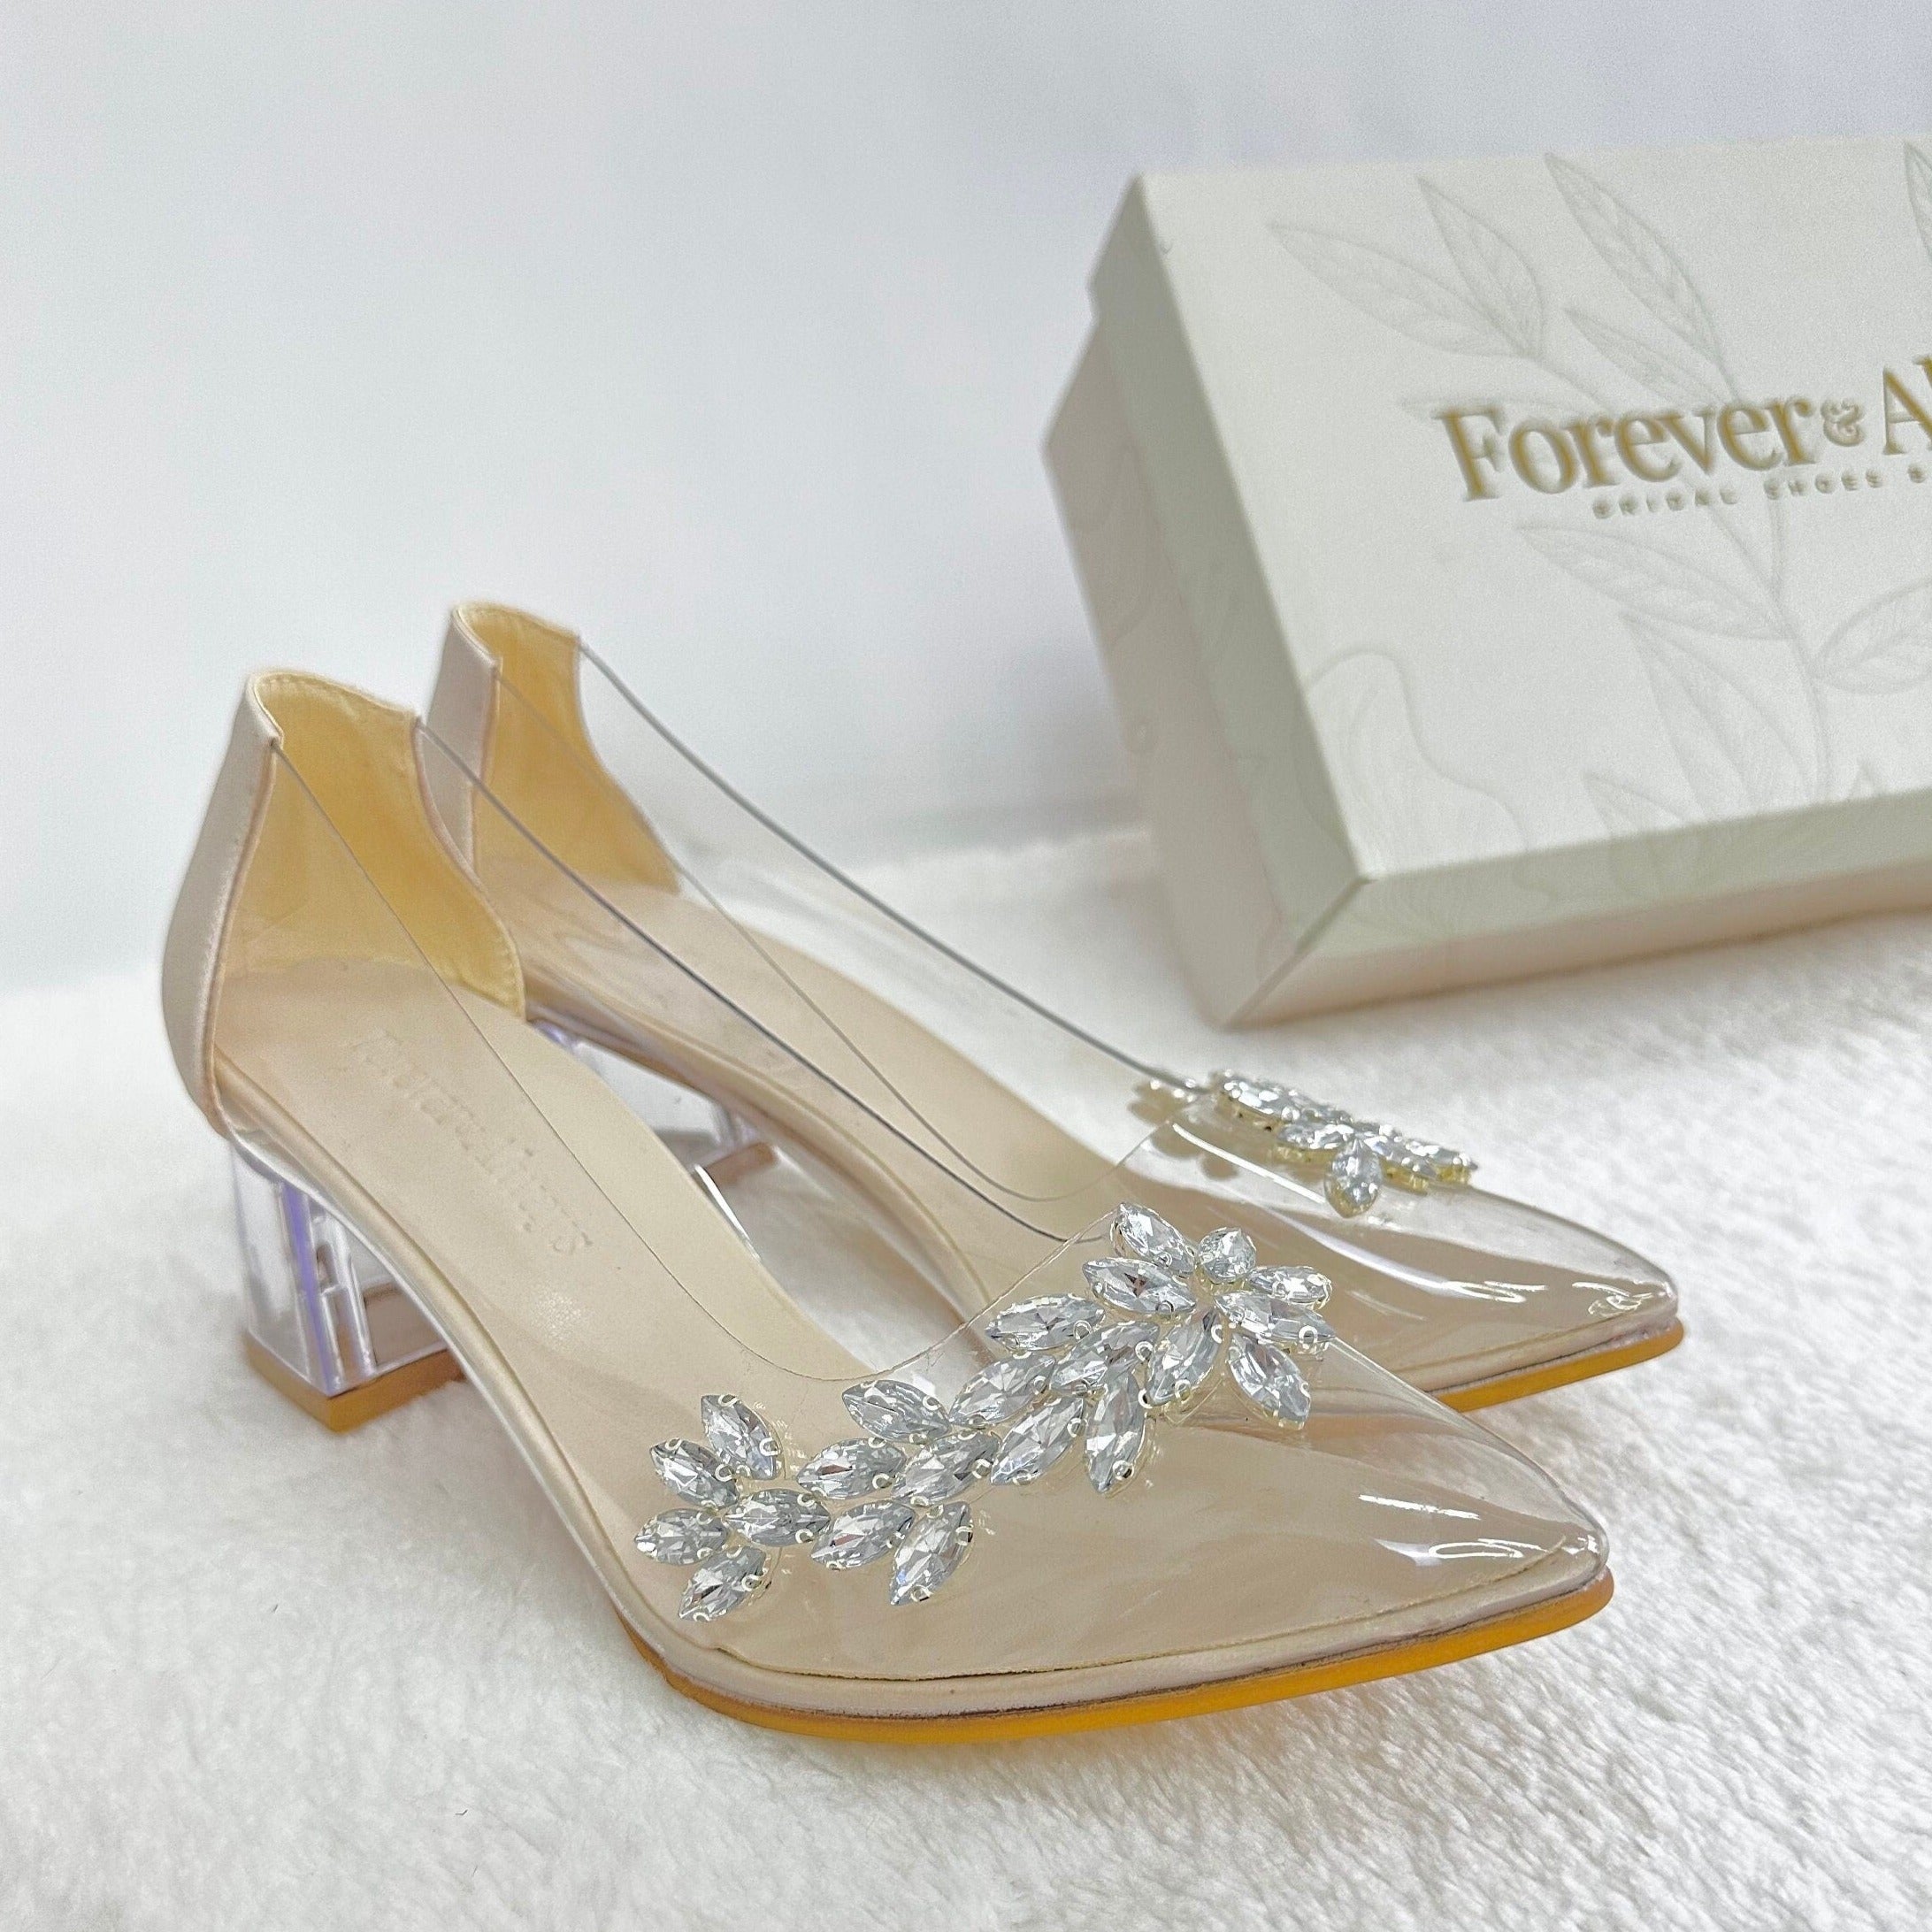 Our Top 5 Low Heel Wedding Shoes | The Perfect Bridal Company